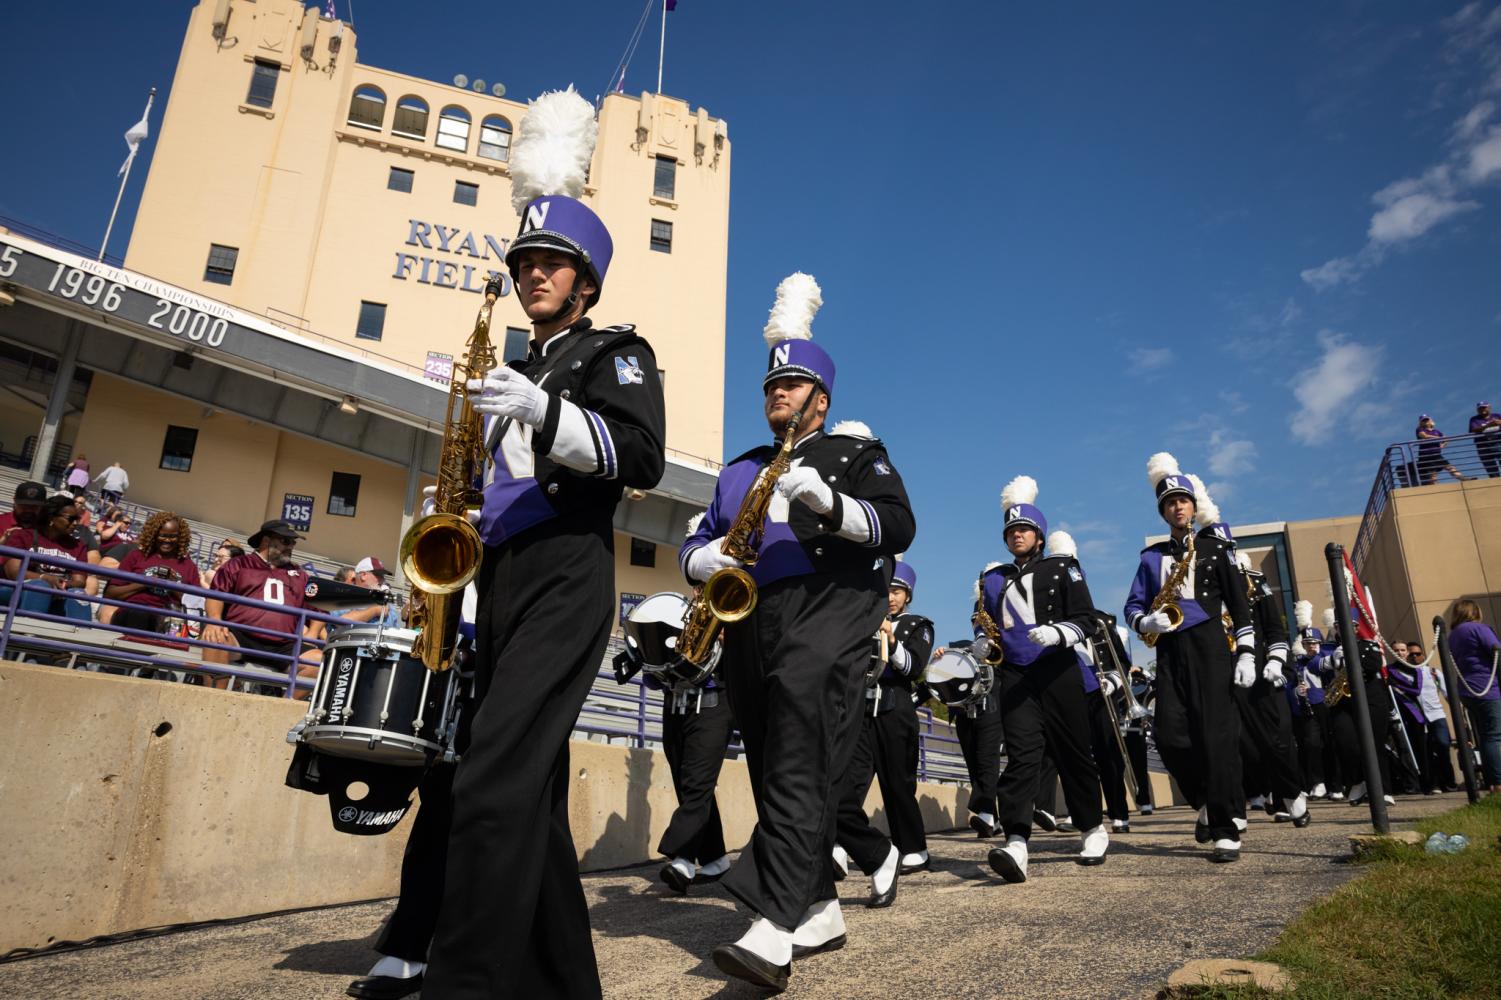 A marching band dressed in black and purple walks down a ramp and onto a football field. 